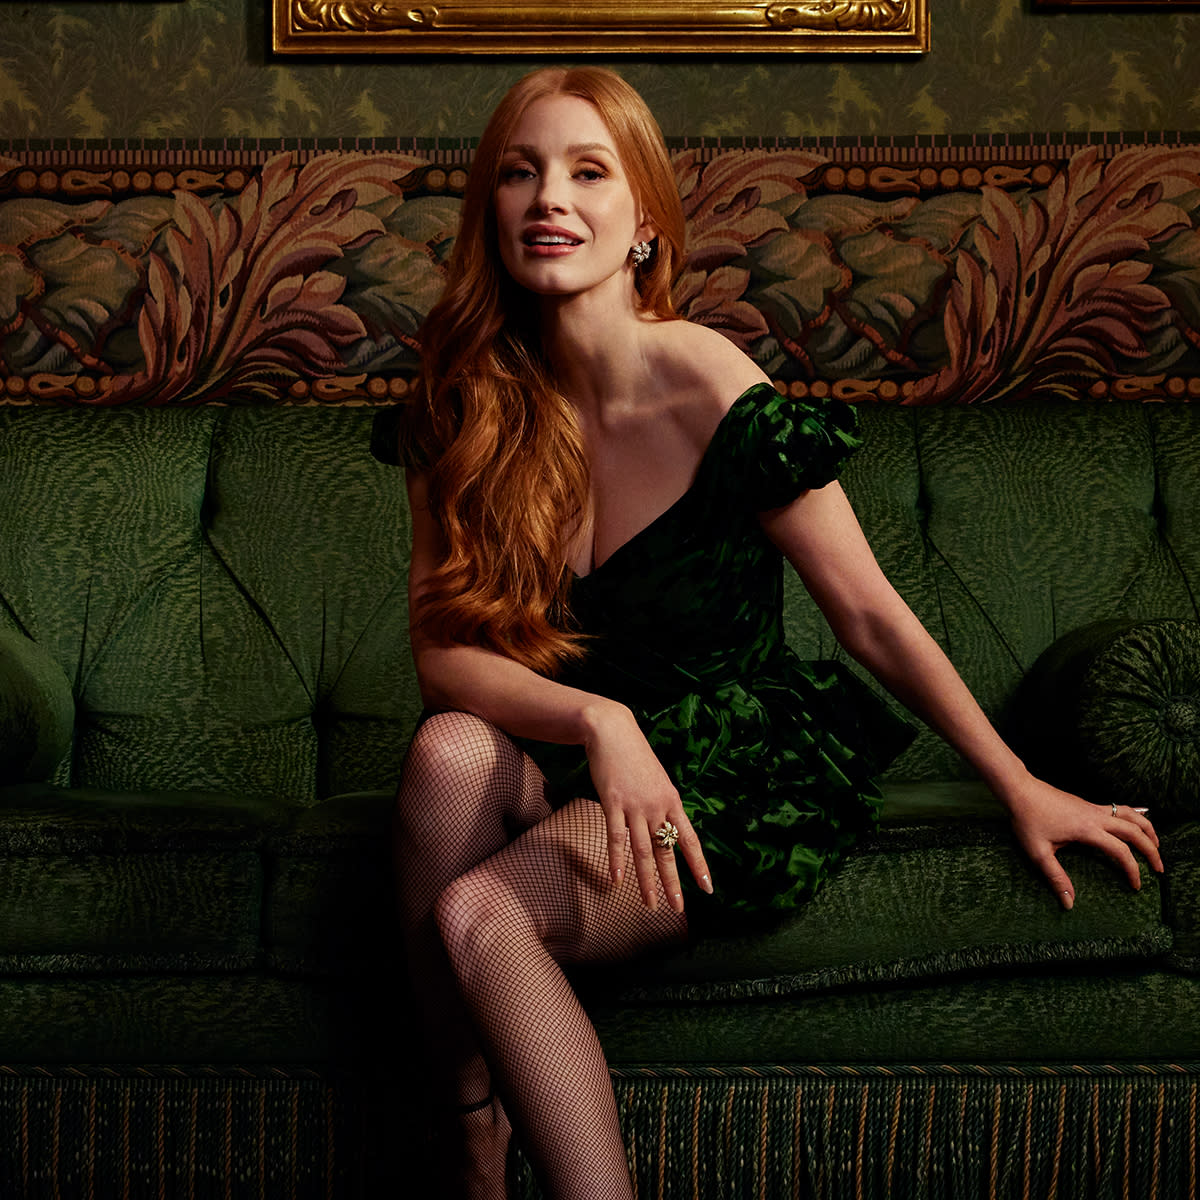  Jessica Chastain leaning on a green brocade couch 